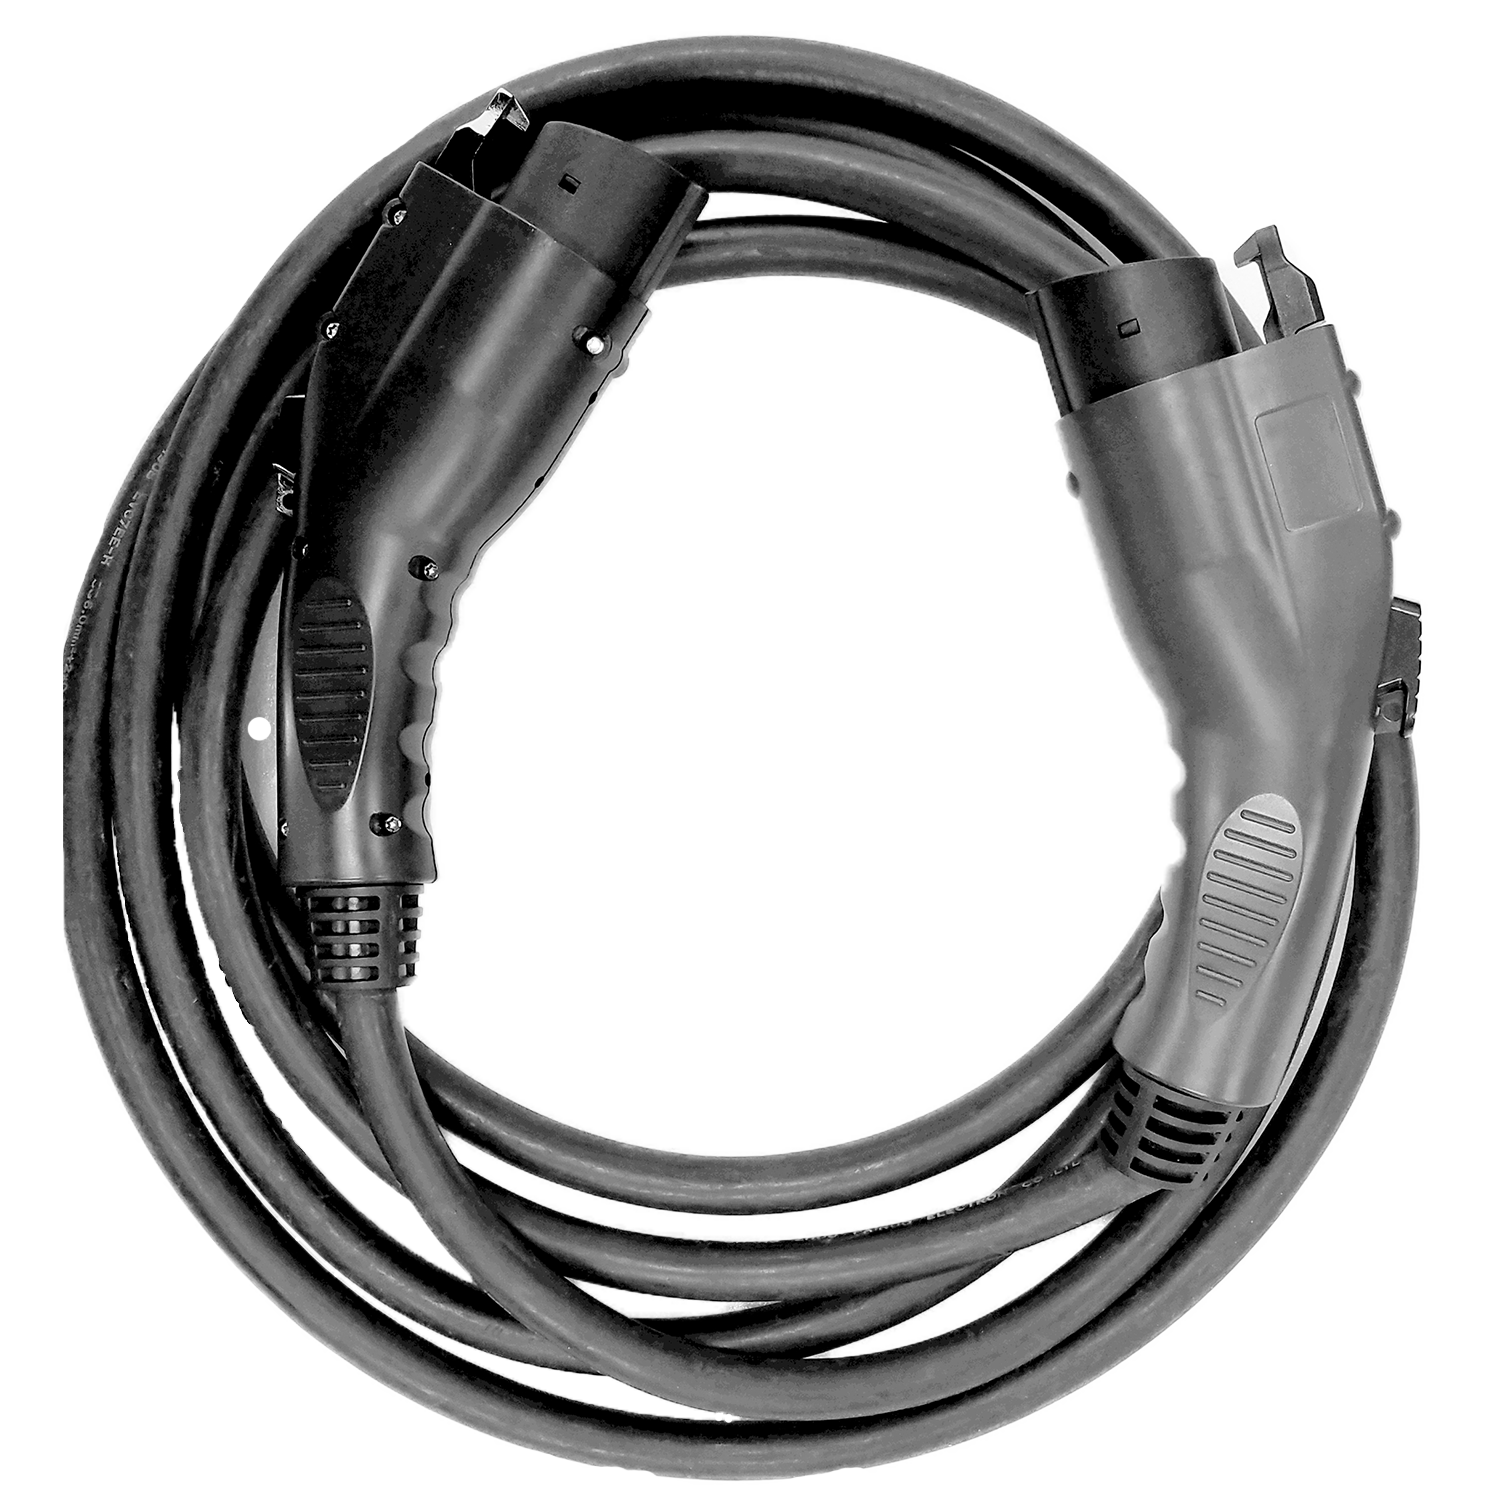 25' Type 2, J1772, Double-Ended Cable